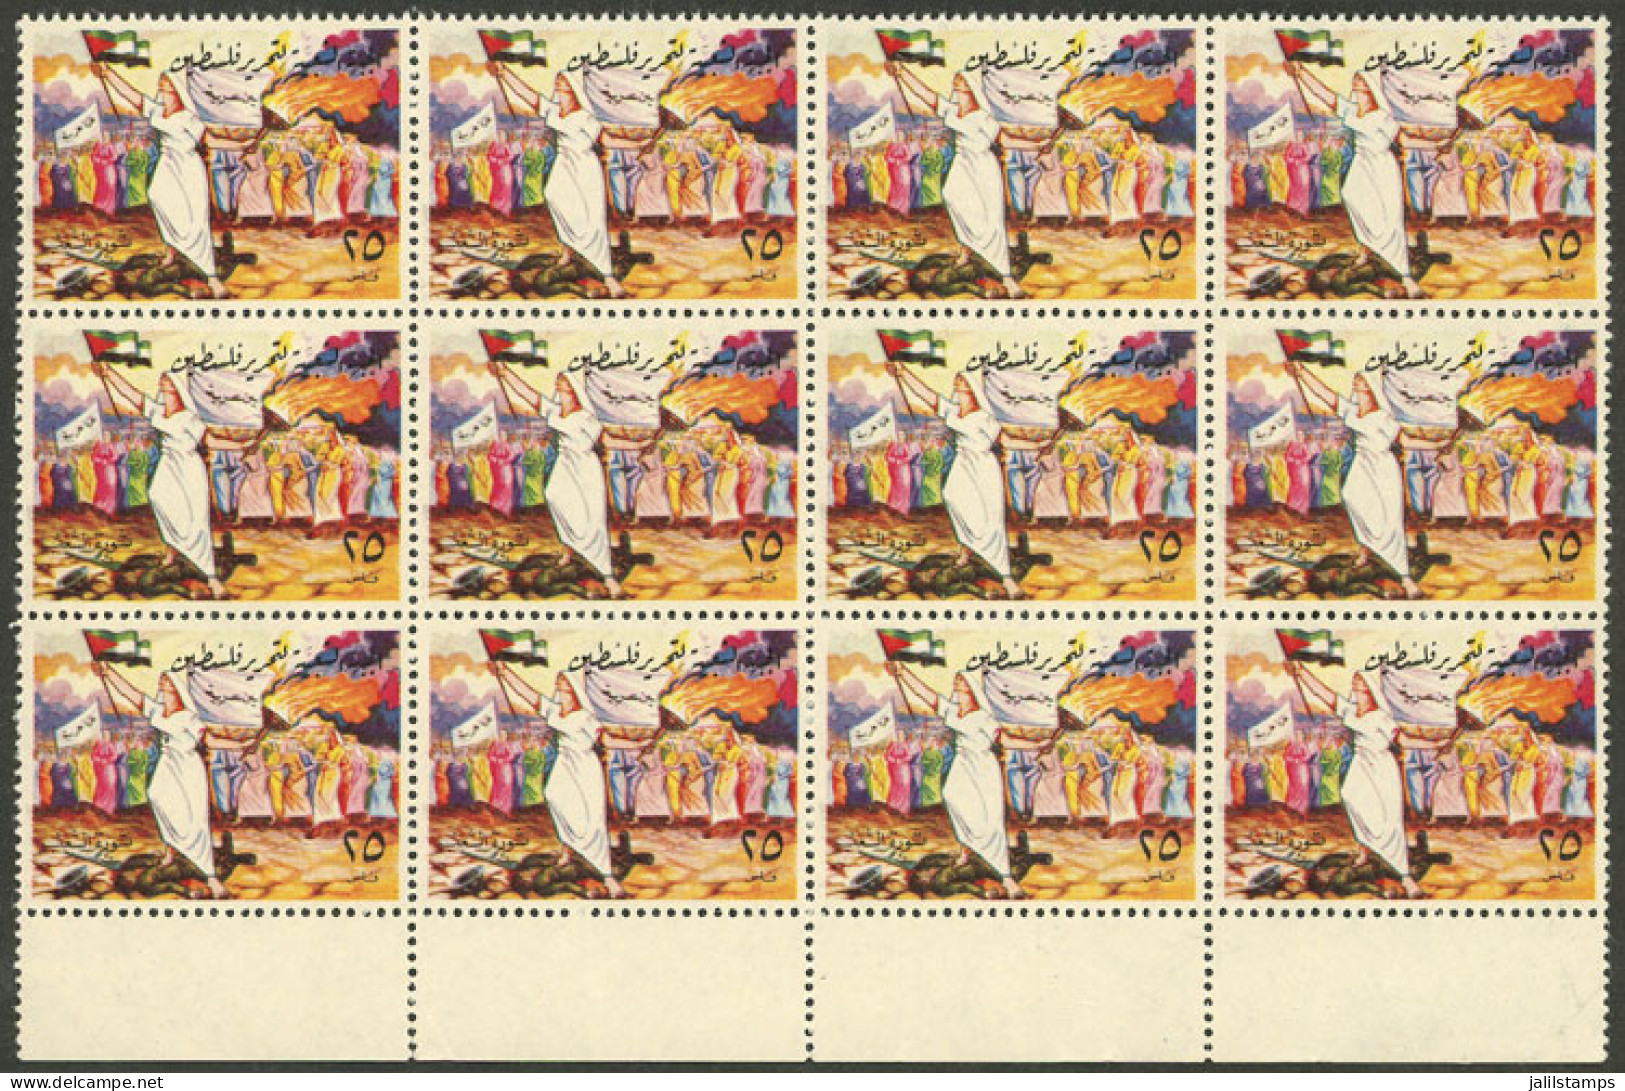 PALESTINE: P.F.L.P., Block Of 12 Stamps: Women, Resistance, MNH, 2 Or 3 Of The Stamps With Minor Defects, The Rest Of Ve - Erinnophilie